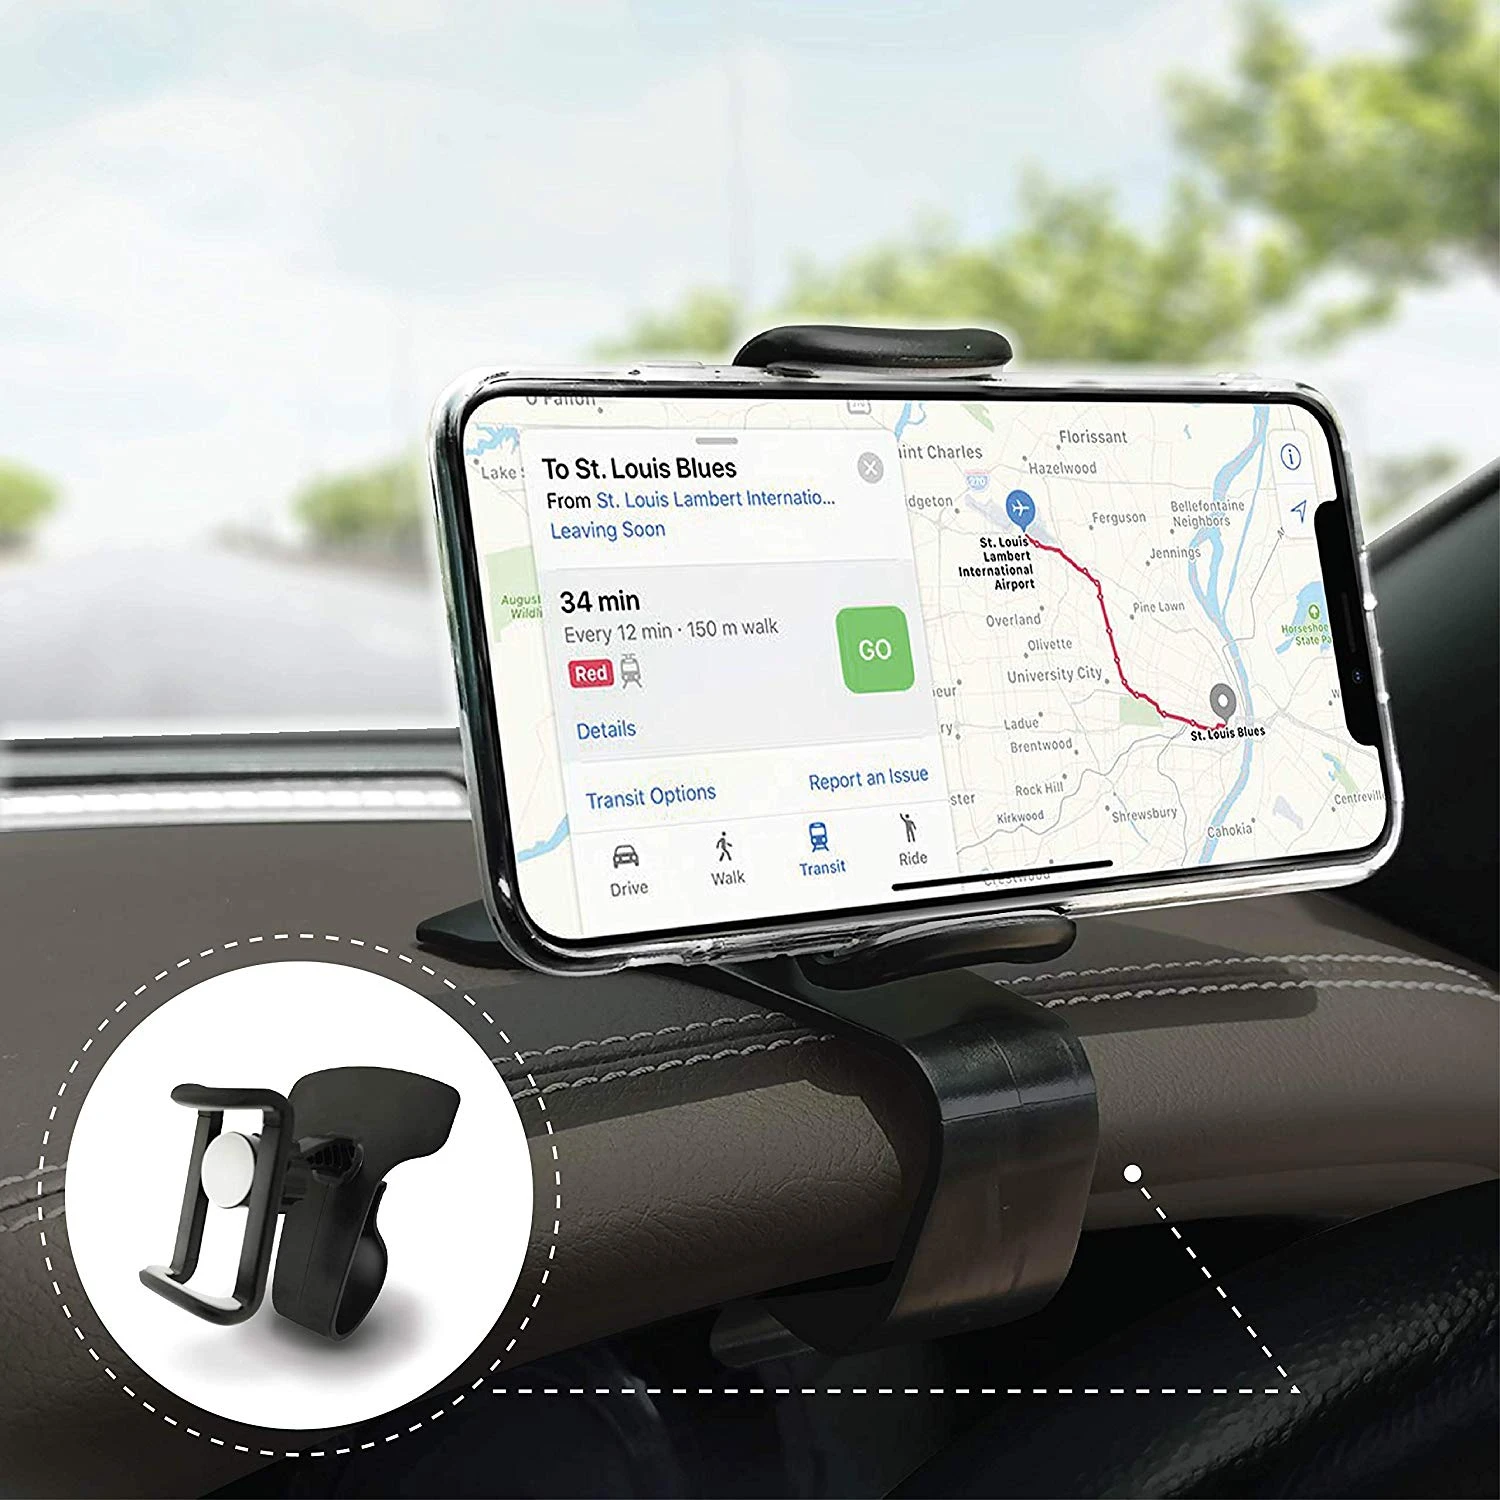 Mompelen hotel Begrip XMXCZKJ Adjustable Car Phone Holder Dashboard Mount Holder For 3.5 6.5 Inch  Clamp Clip Car Styling Stand For iPhone 11 Pro Max|Phone Holders & Stands|  - AliExpress